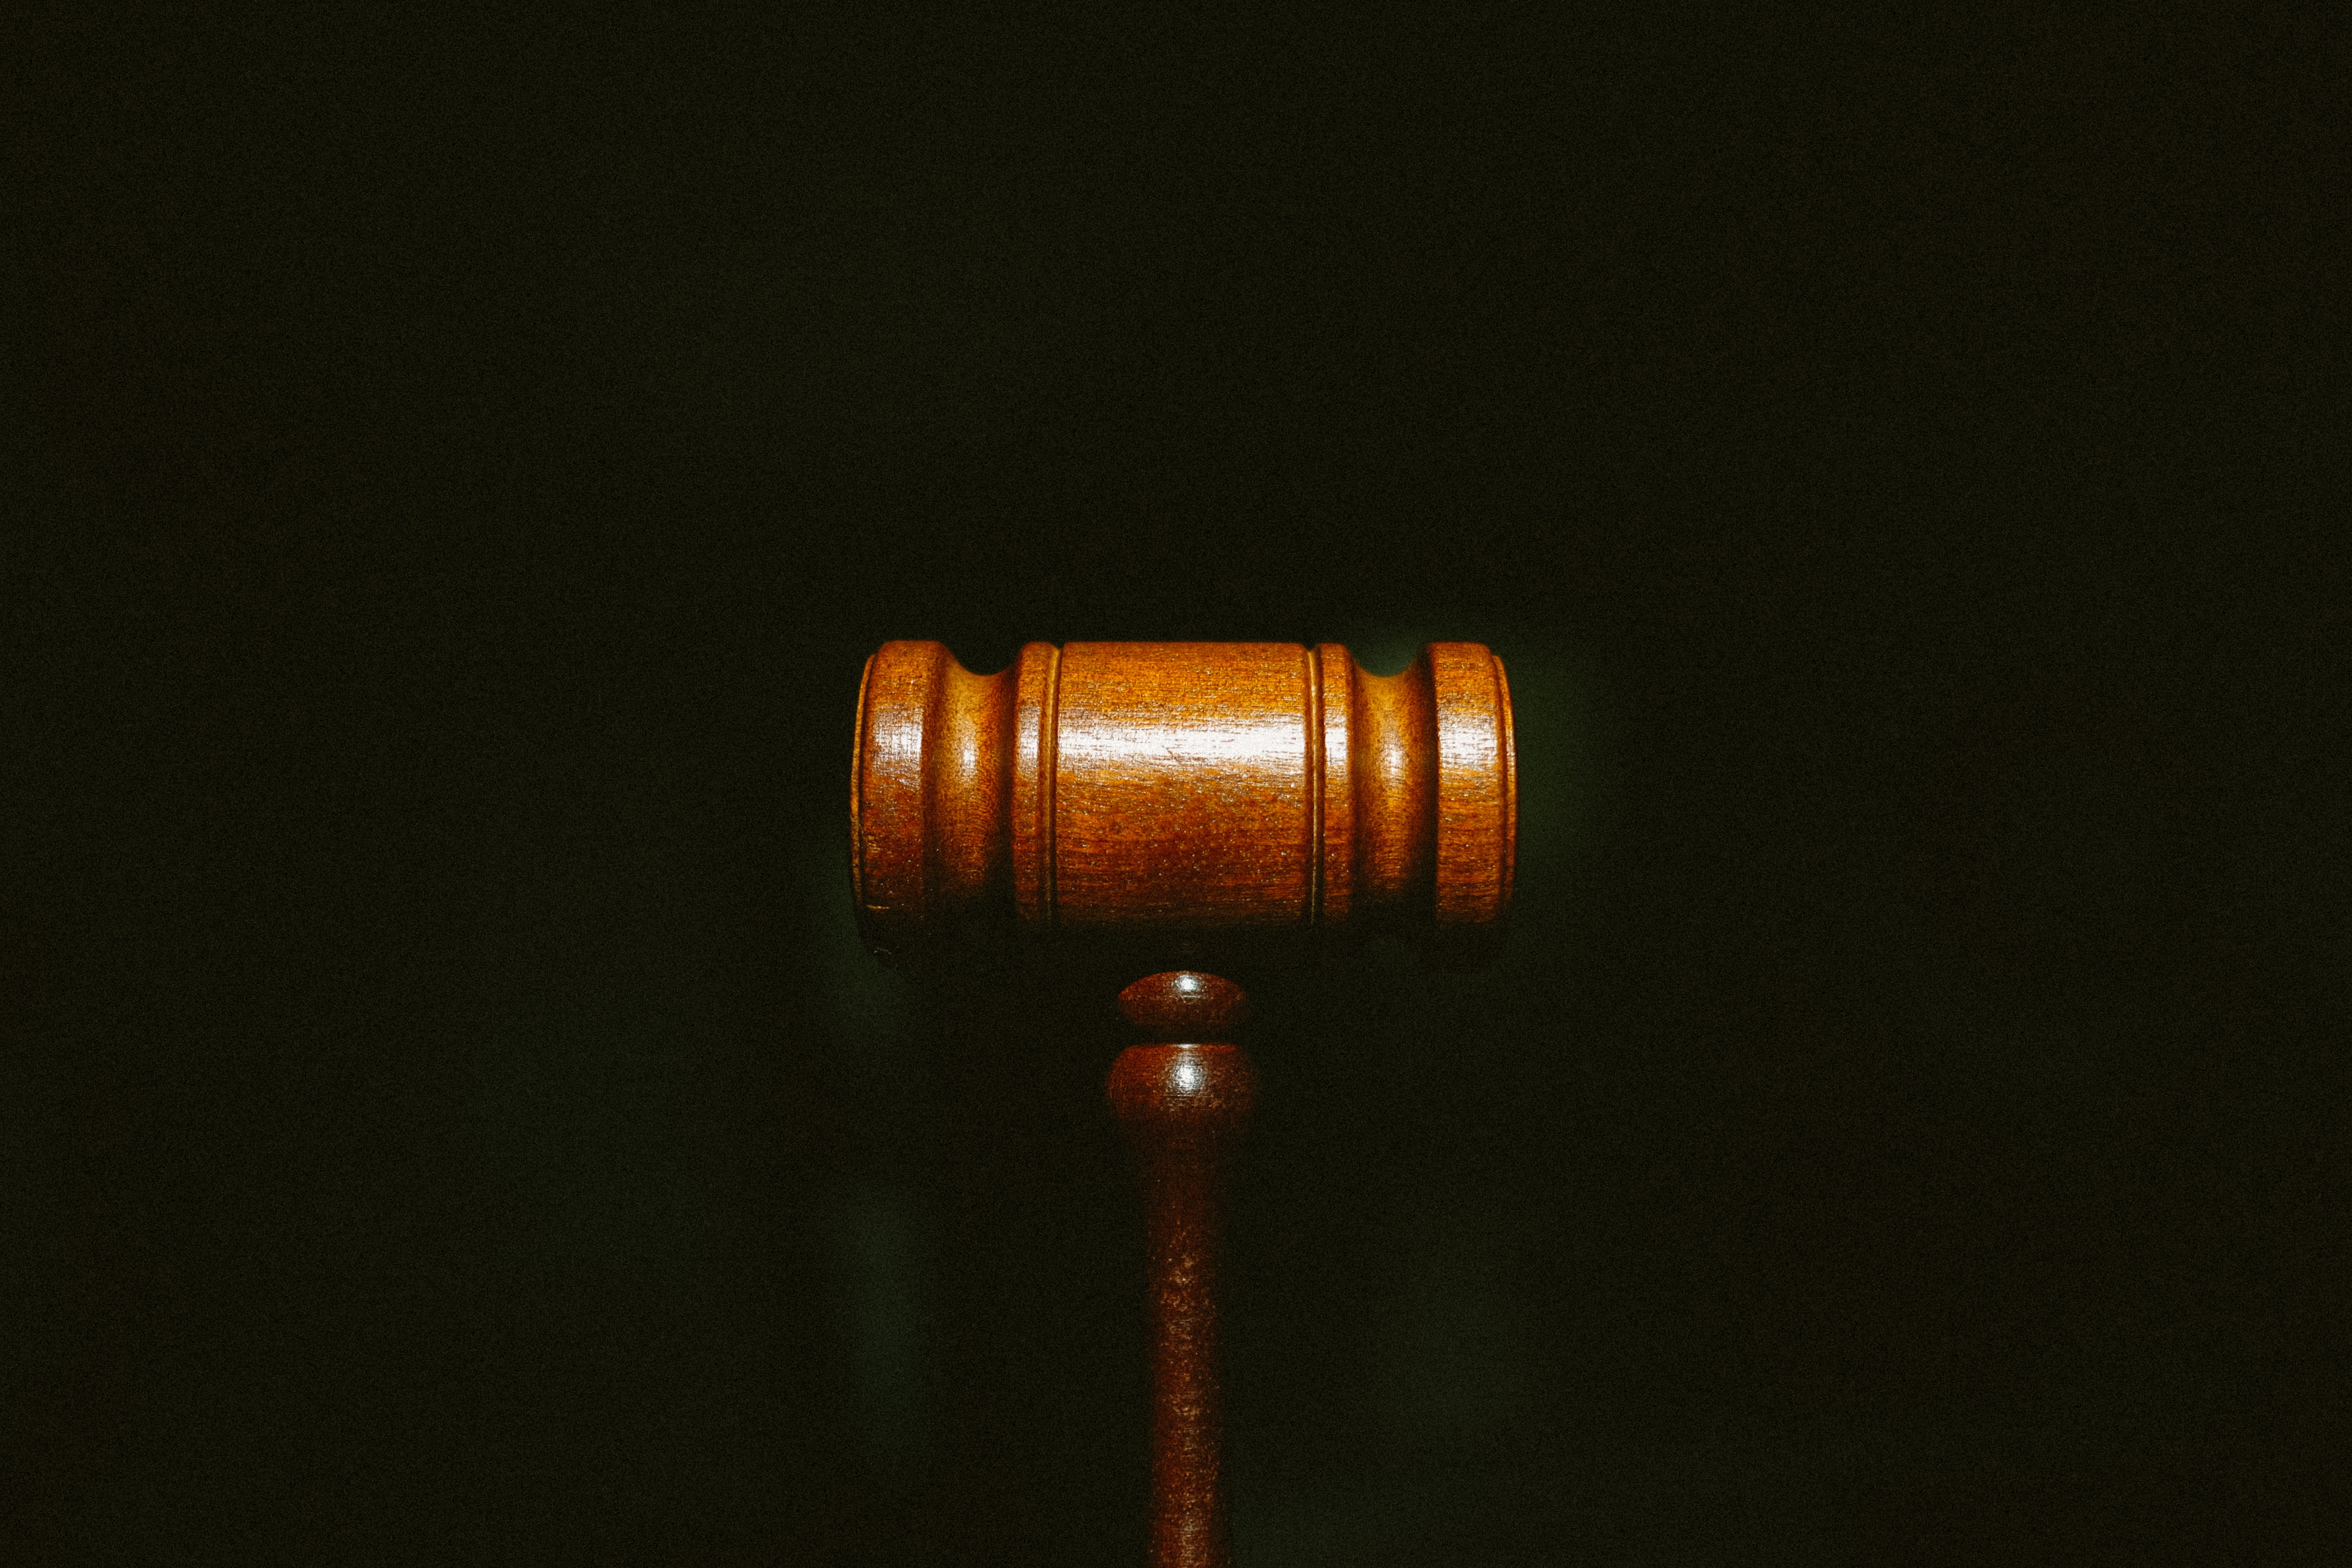 Generic law gavel on a black background